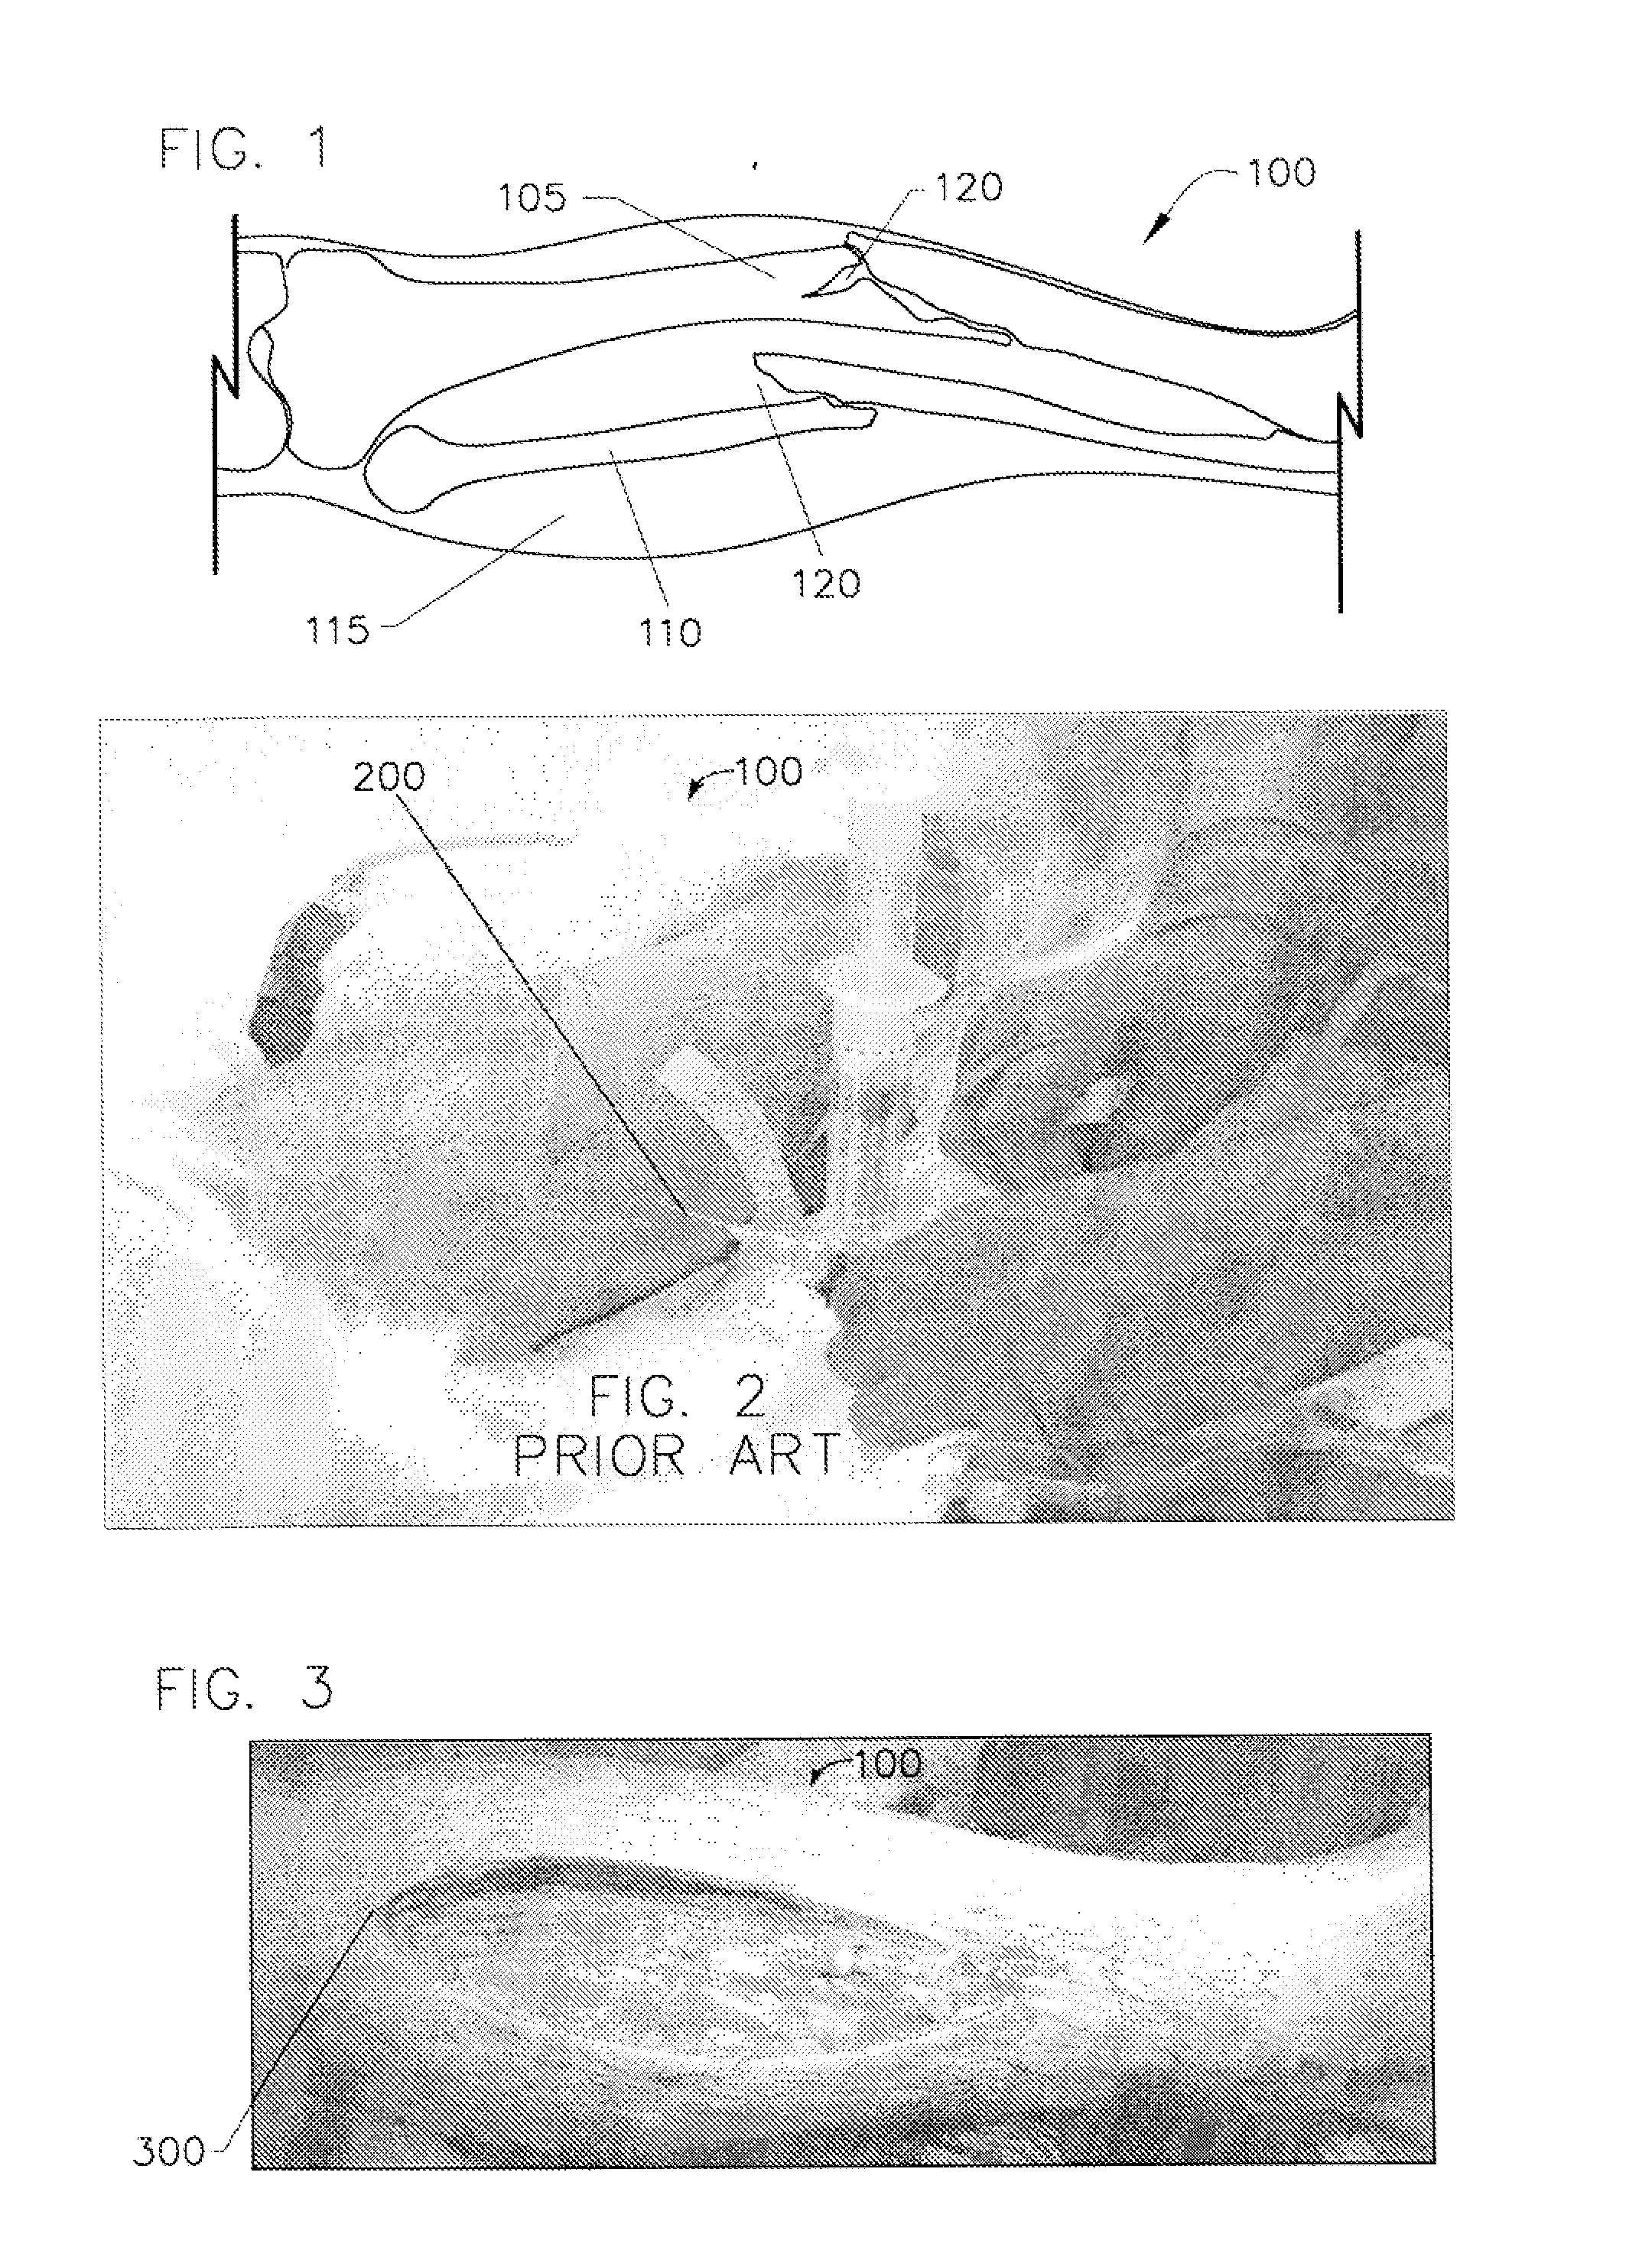 Method and system for monitoring oxygenation levels of compartments and tissue